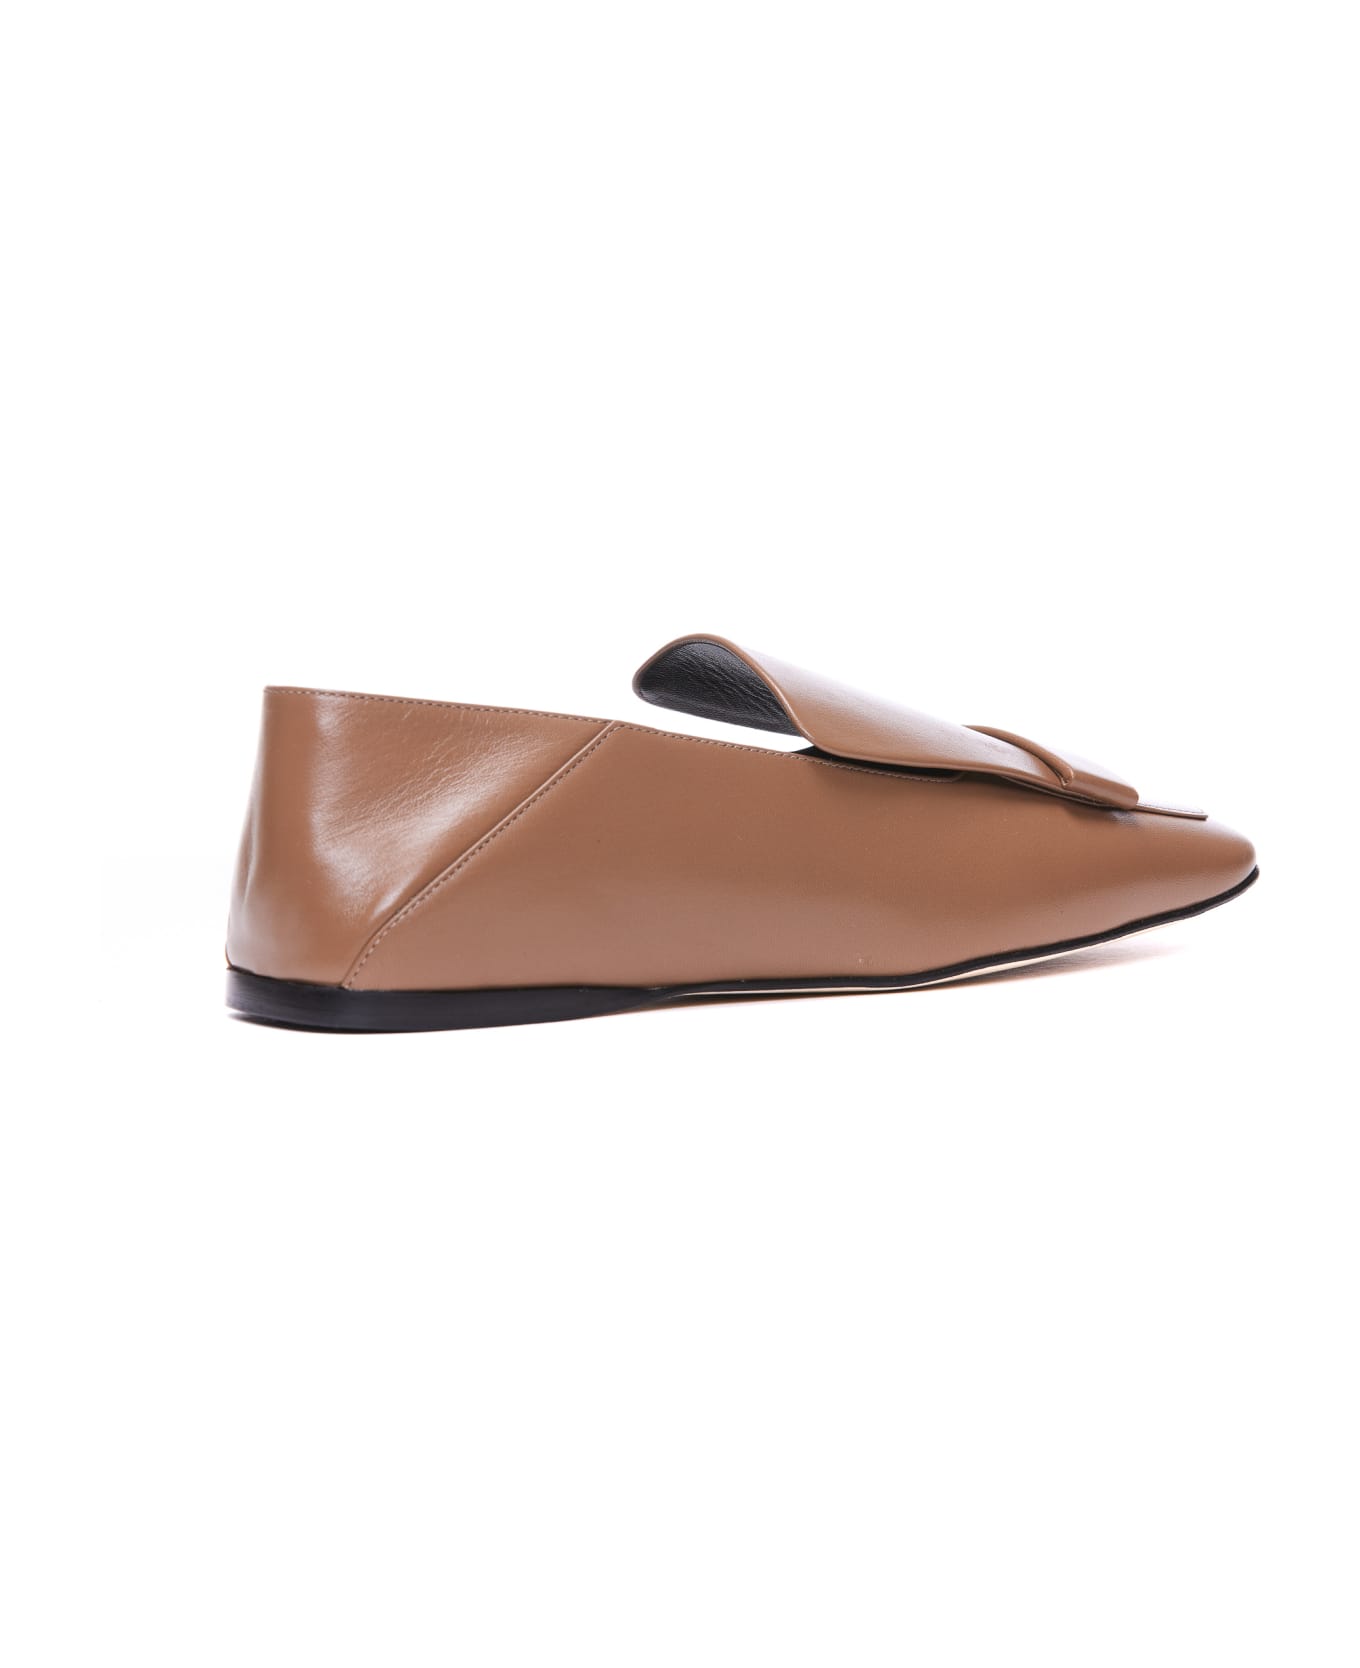 Sergio Rossi Flat Moccasin 05 - Brown